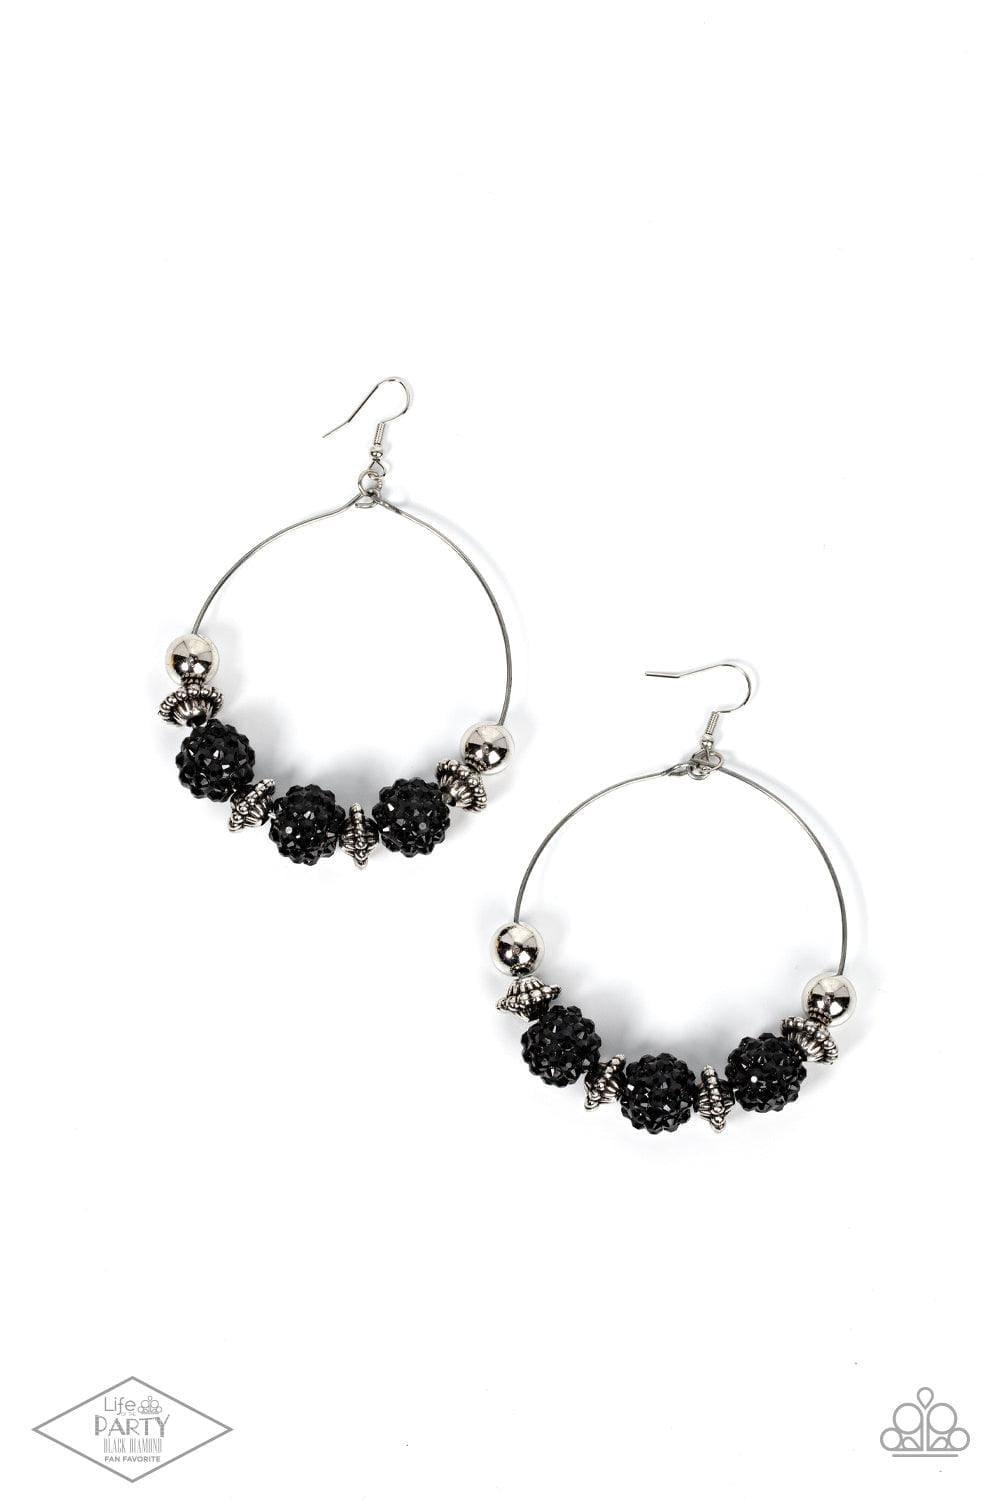 Paparazzi Accessories - I Can Take a Compliment - Black Earrings - Bling by JessieK